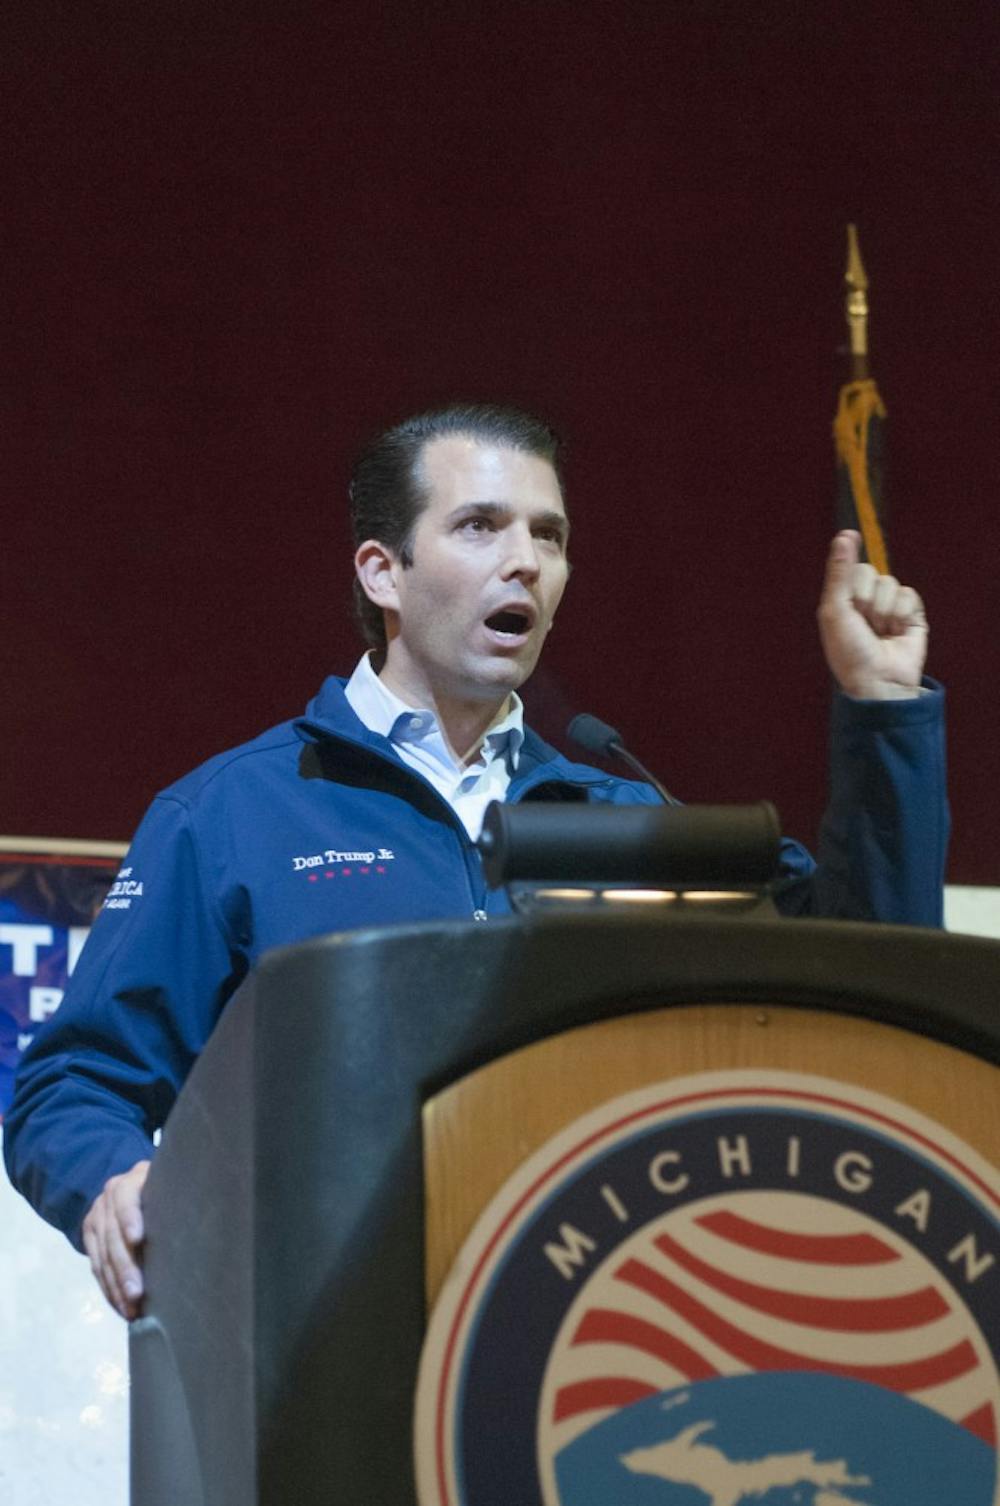 Donald Trump Jr. speaks into a microphone on Oct. 2, 2016 in the Union. Trump was speaking in support of his father's presidential campaign. 